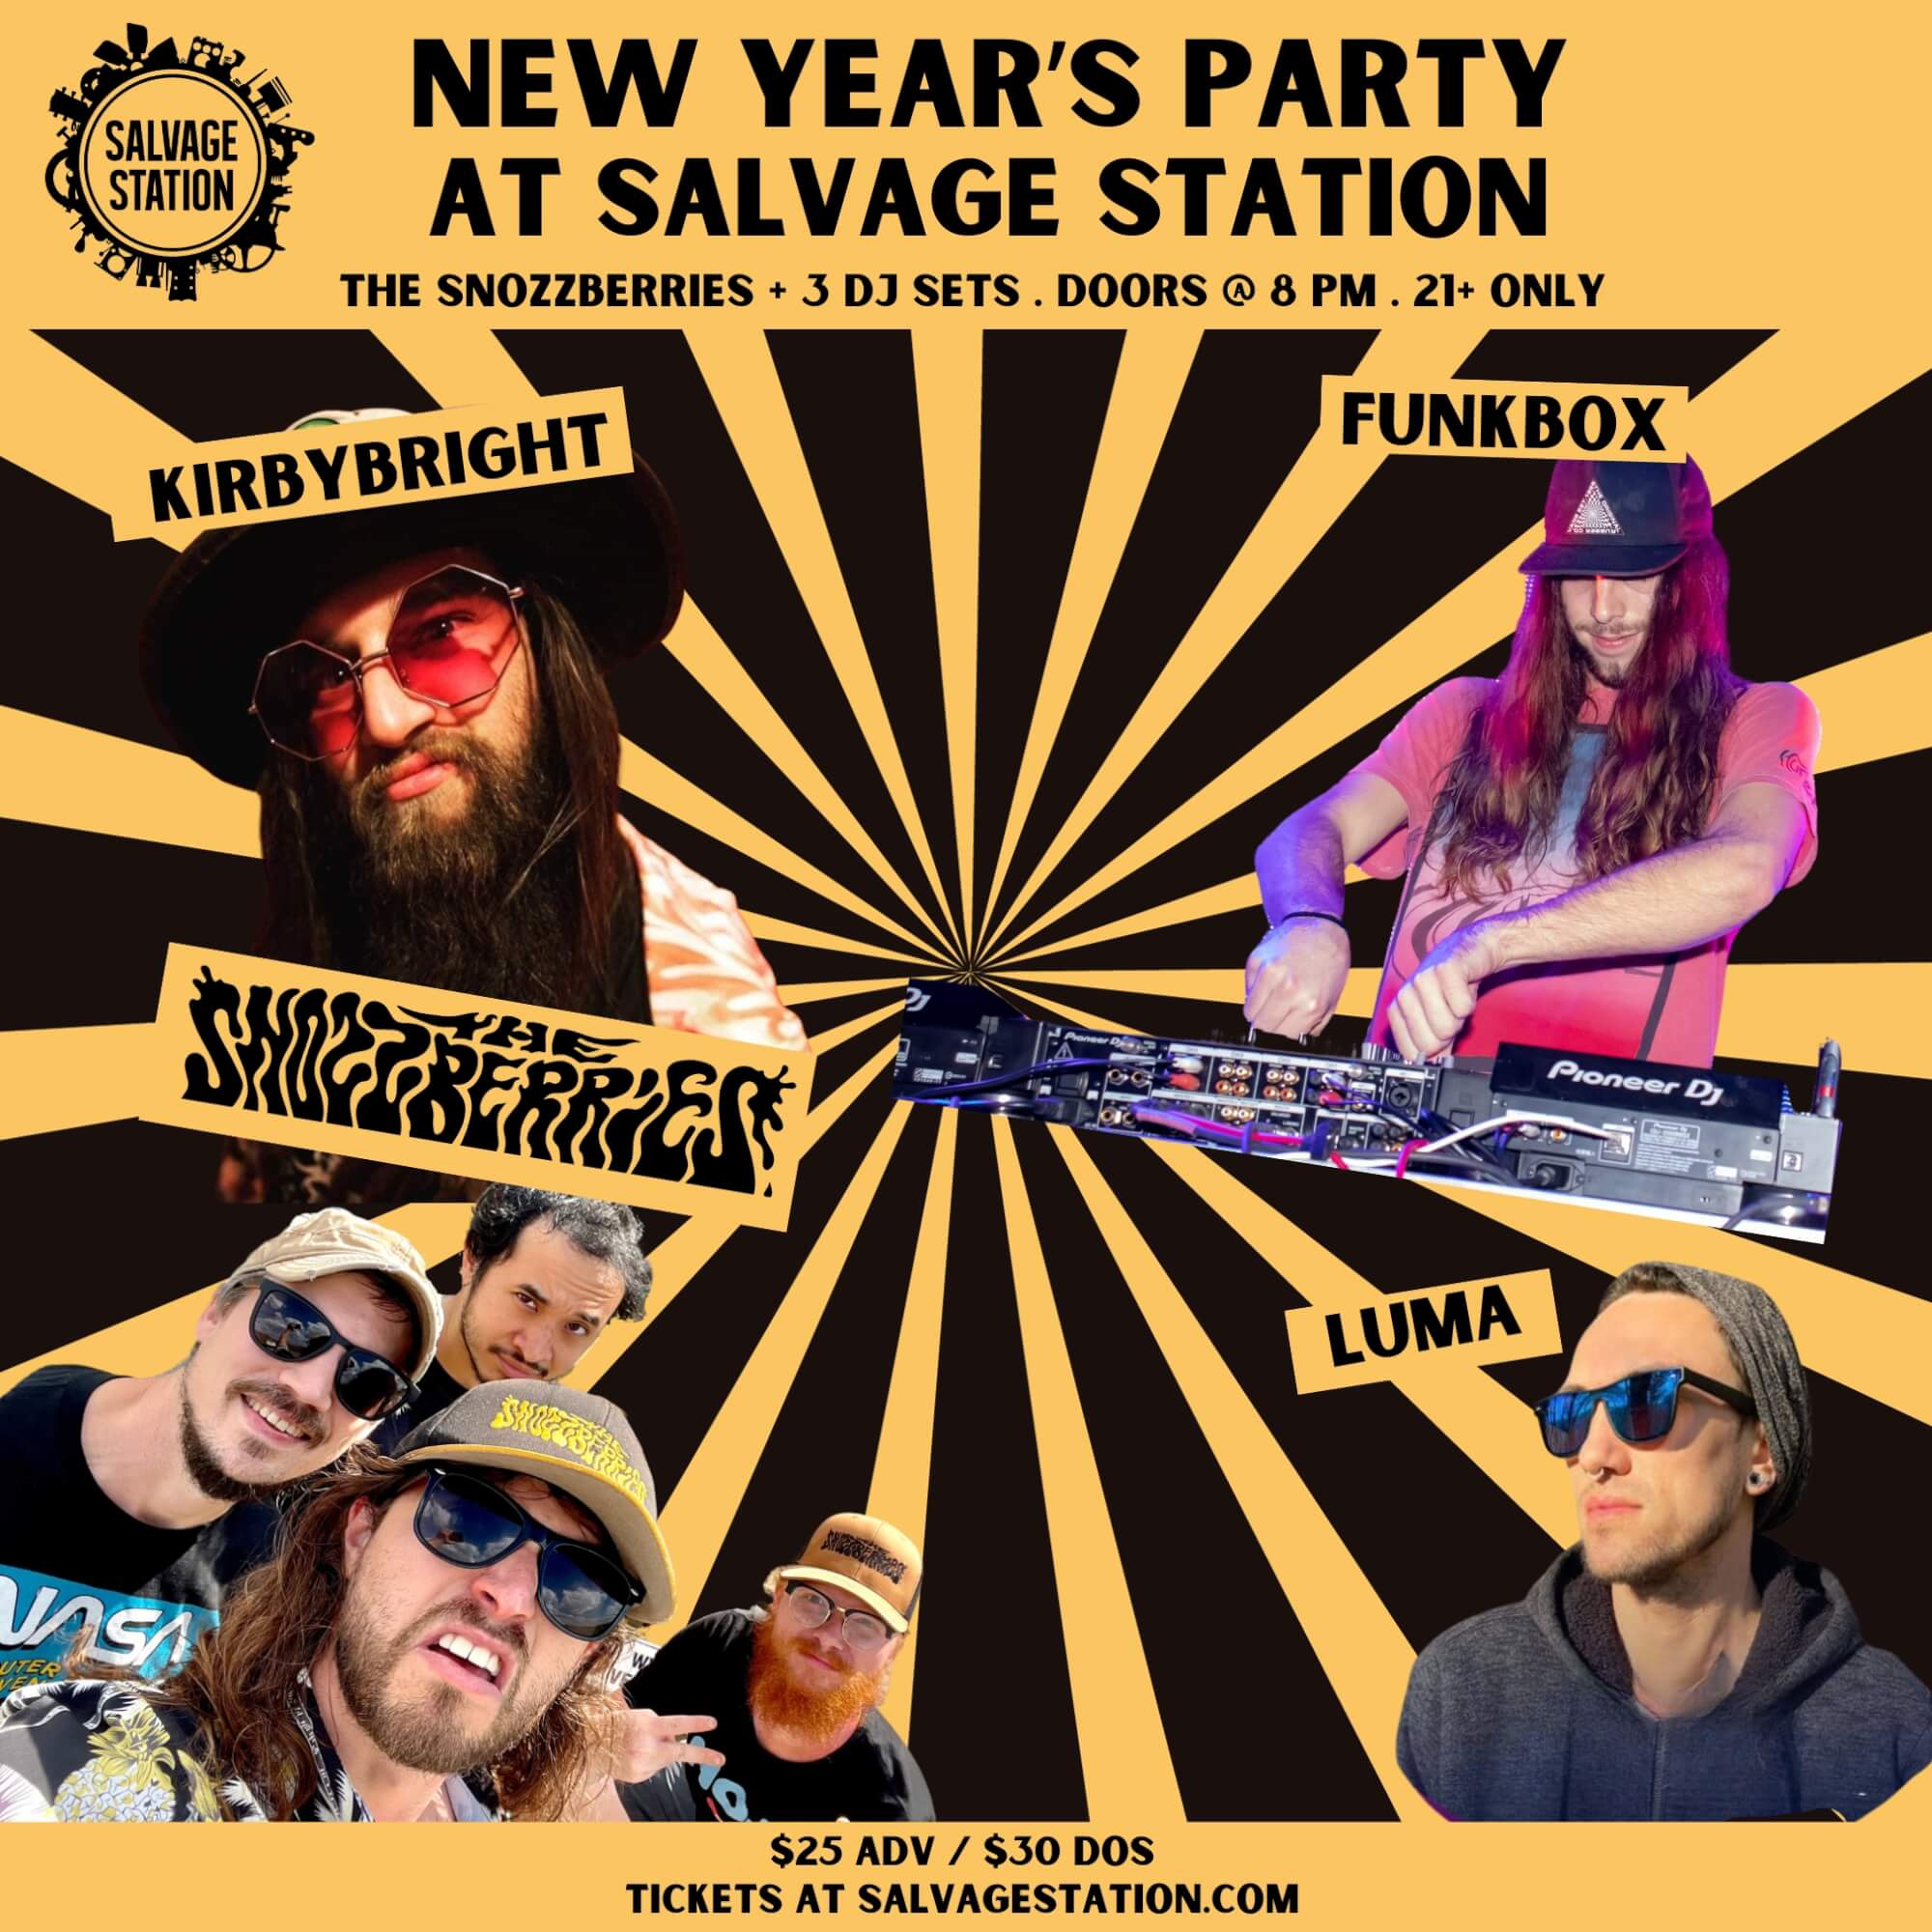 New Year’s Eve Party at Salvage Station!